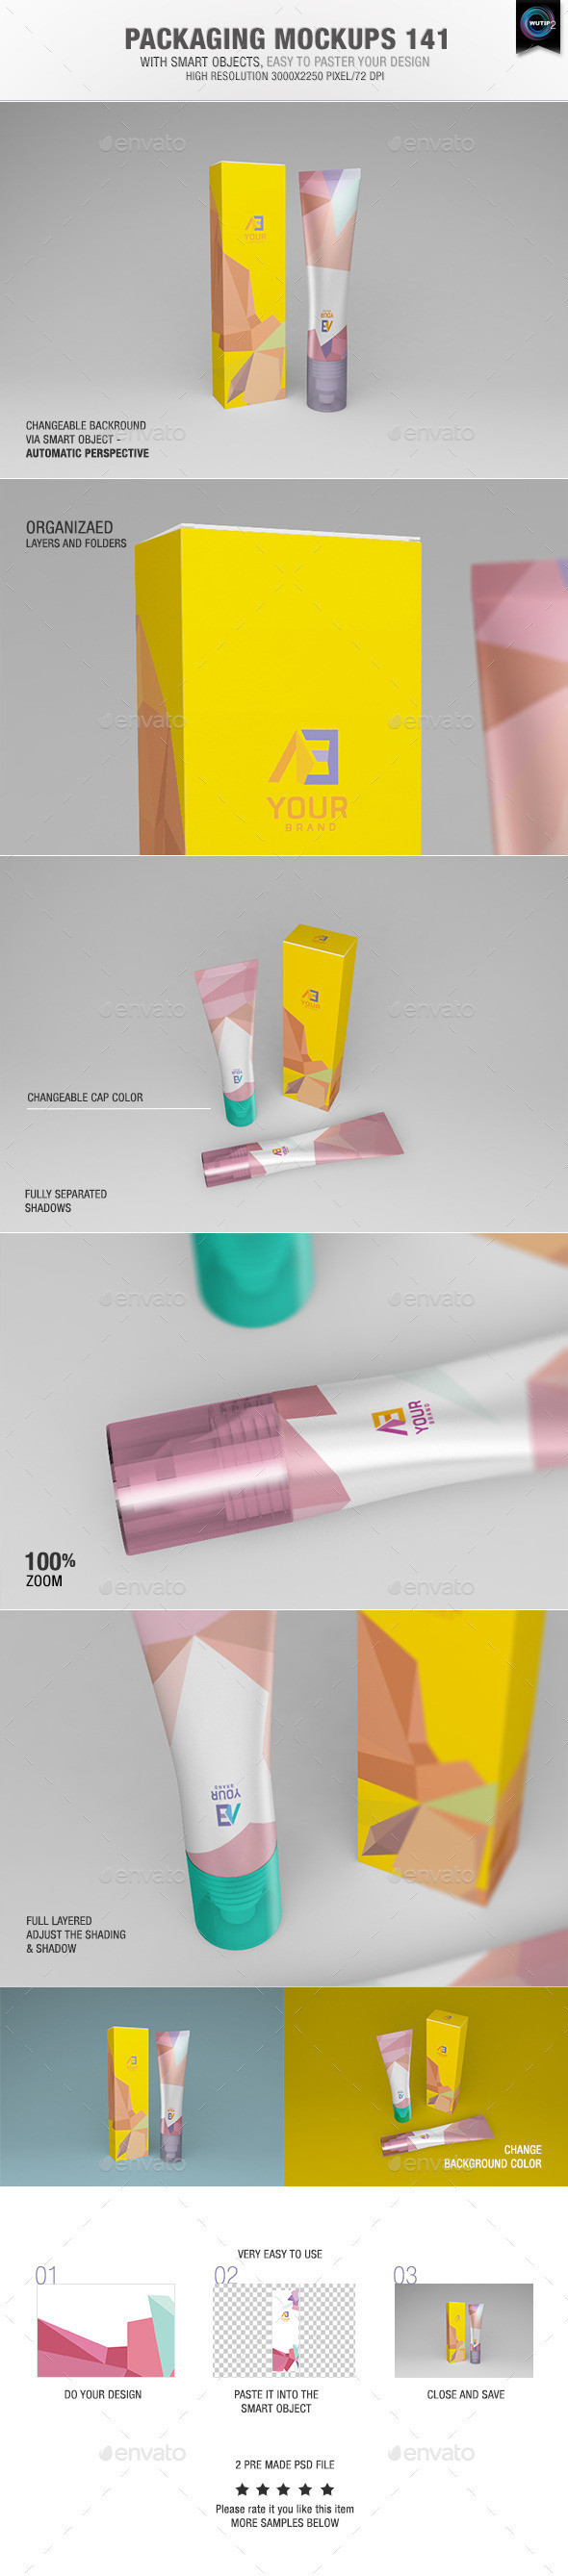 Packaging 20mockups 20141 20preview